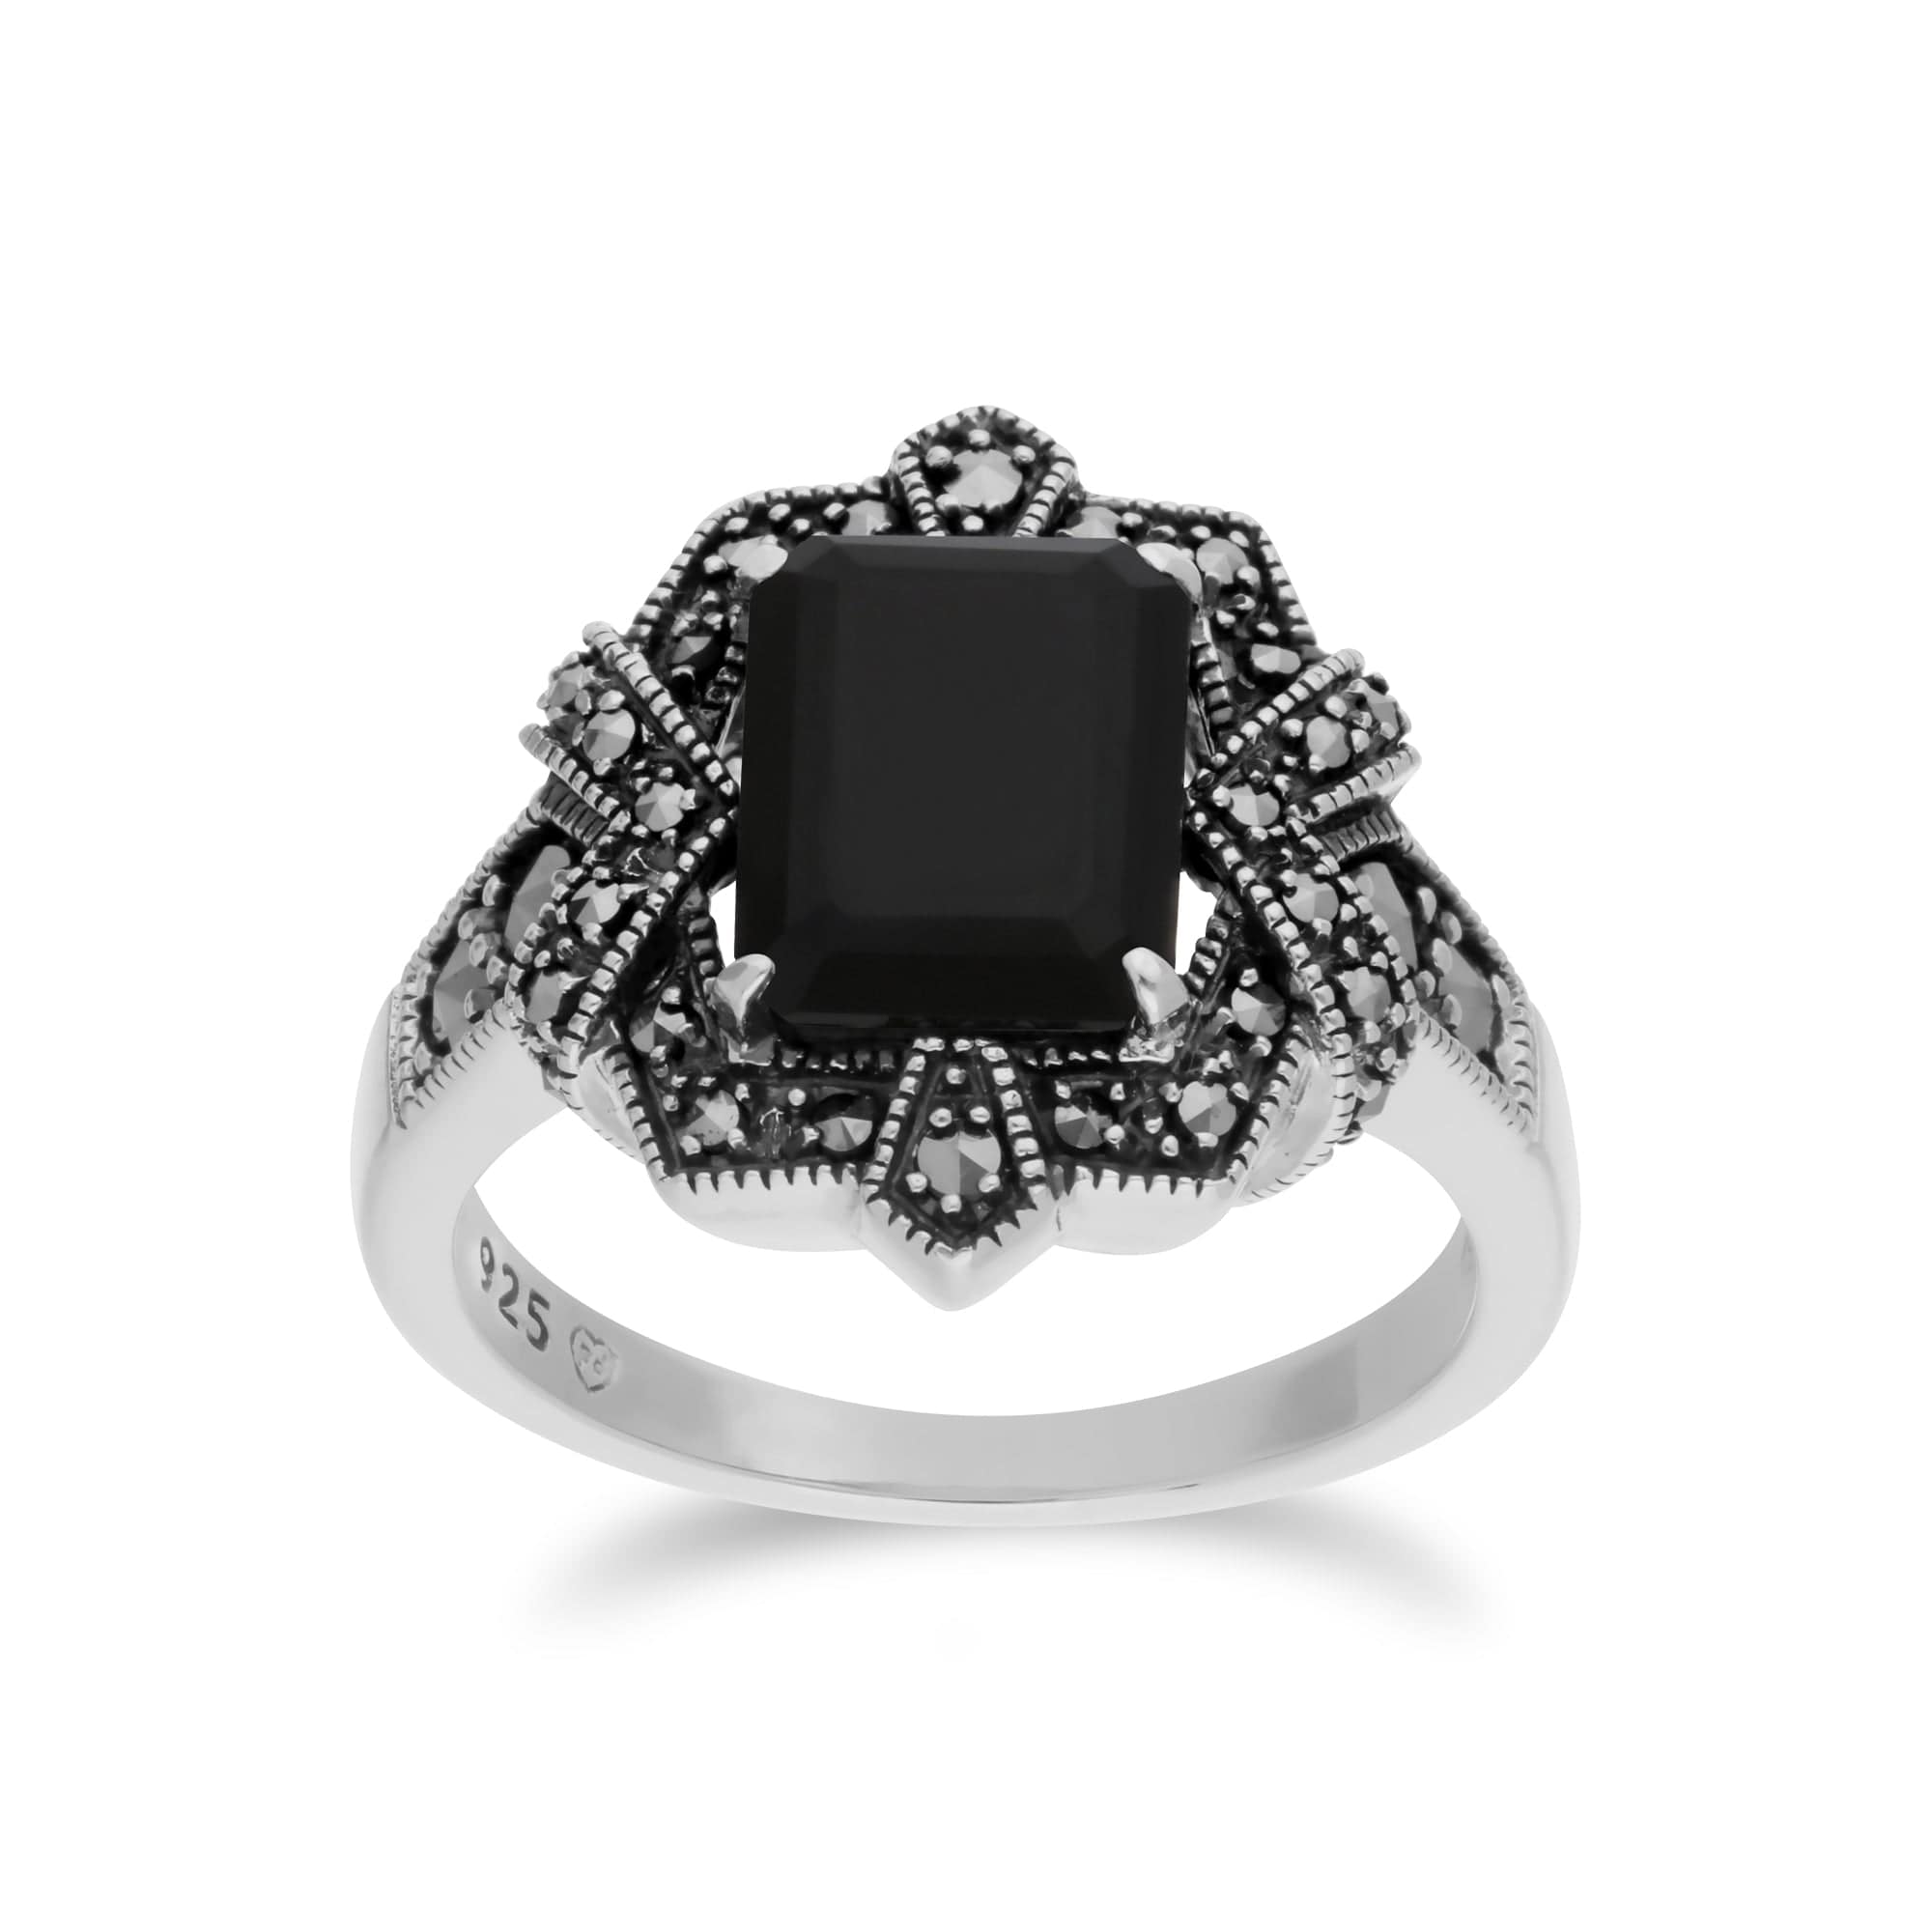 Art Deco Style Baguette Black Onyx & Marcasite Ring in 925 Sterling Silver